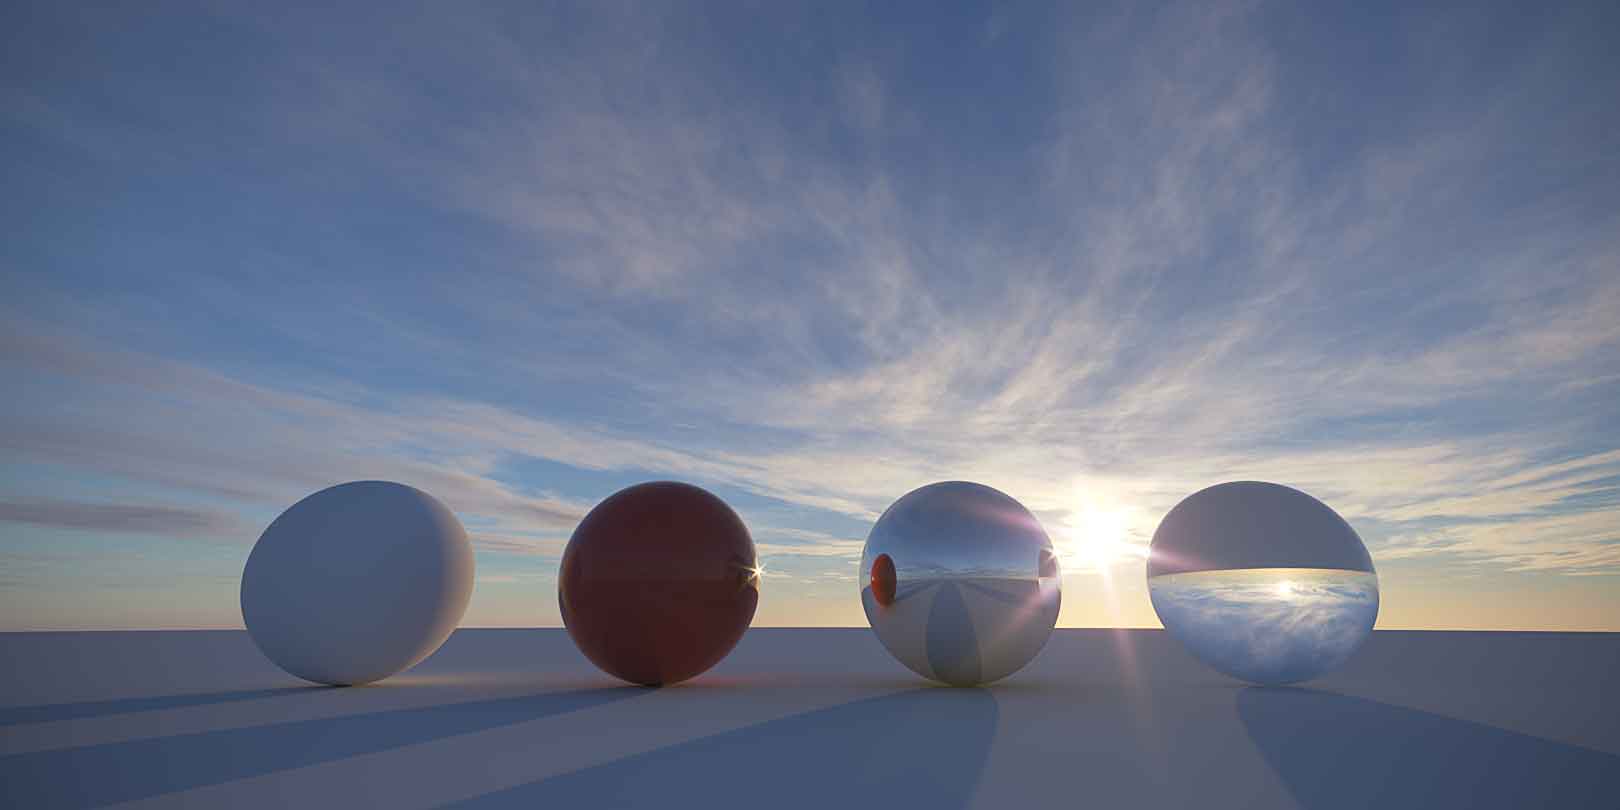 CG HDRI / Winter Skies from helloluxx by Shawn Astrom